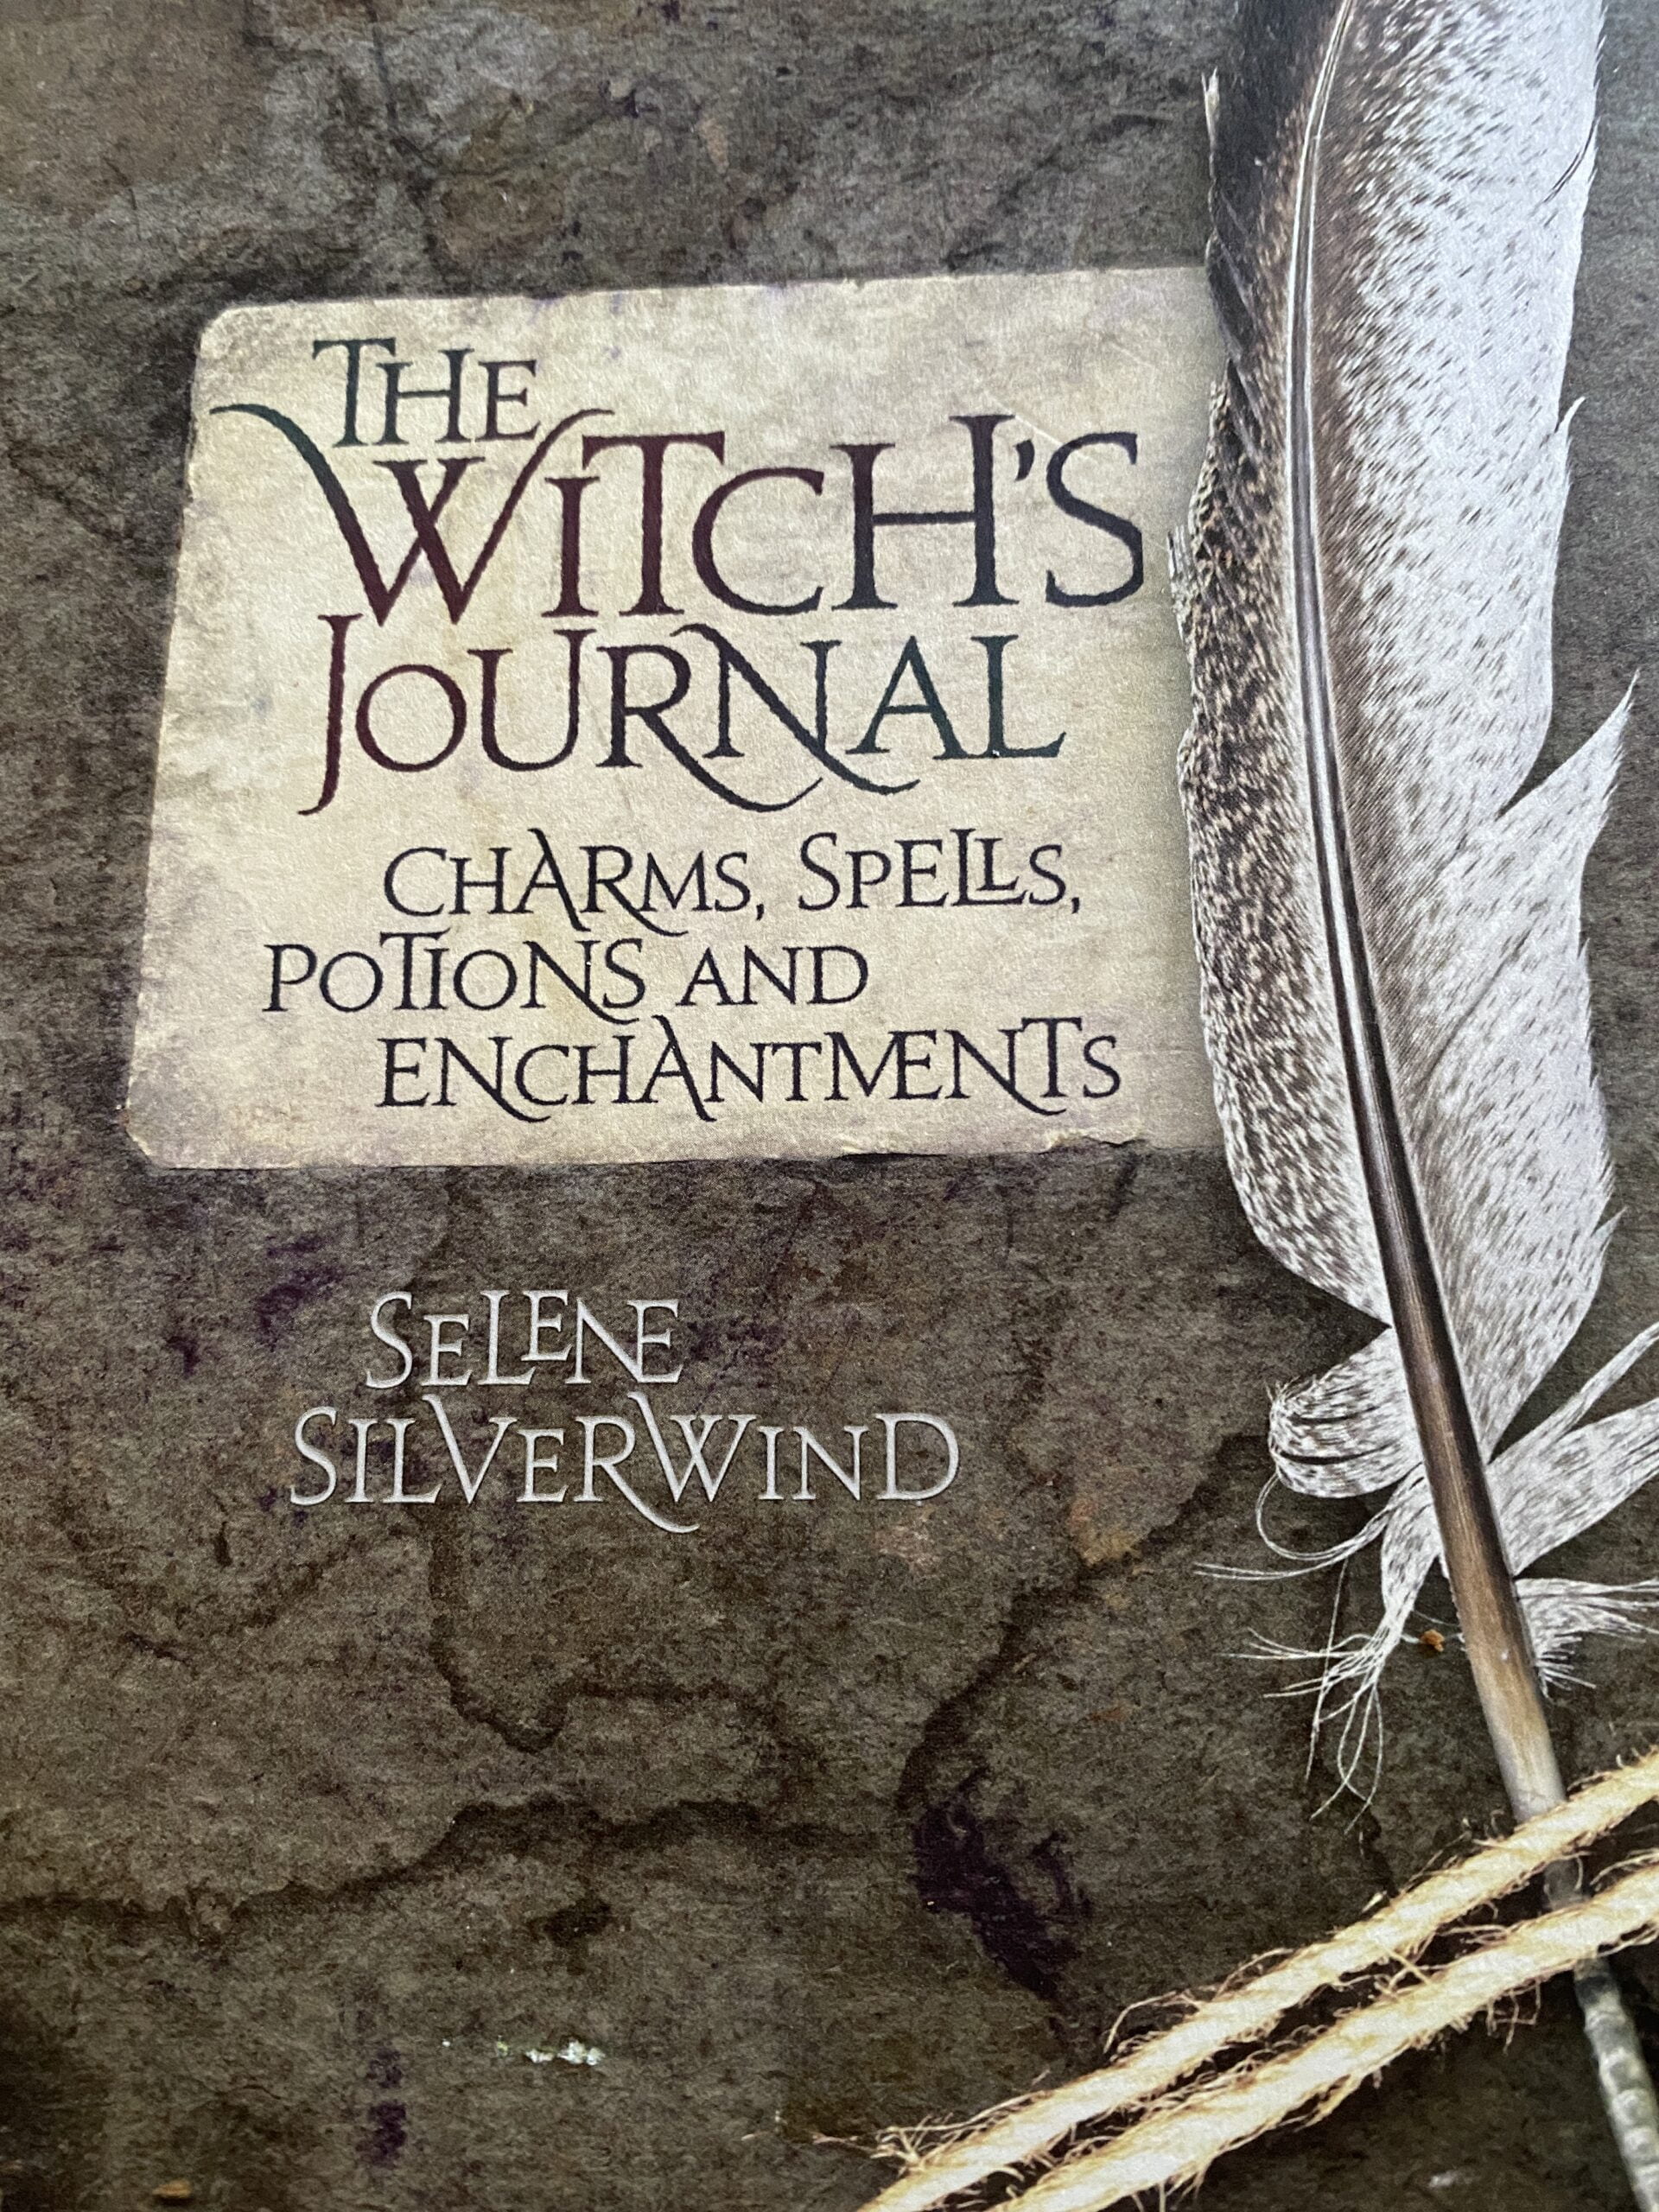 THE WITCHES JOURNAL BY SELENE SILVERWIND – BOOK REVIEW